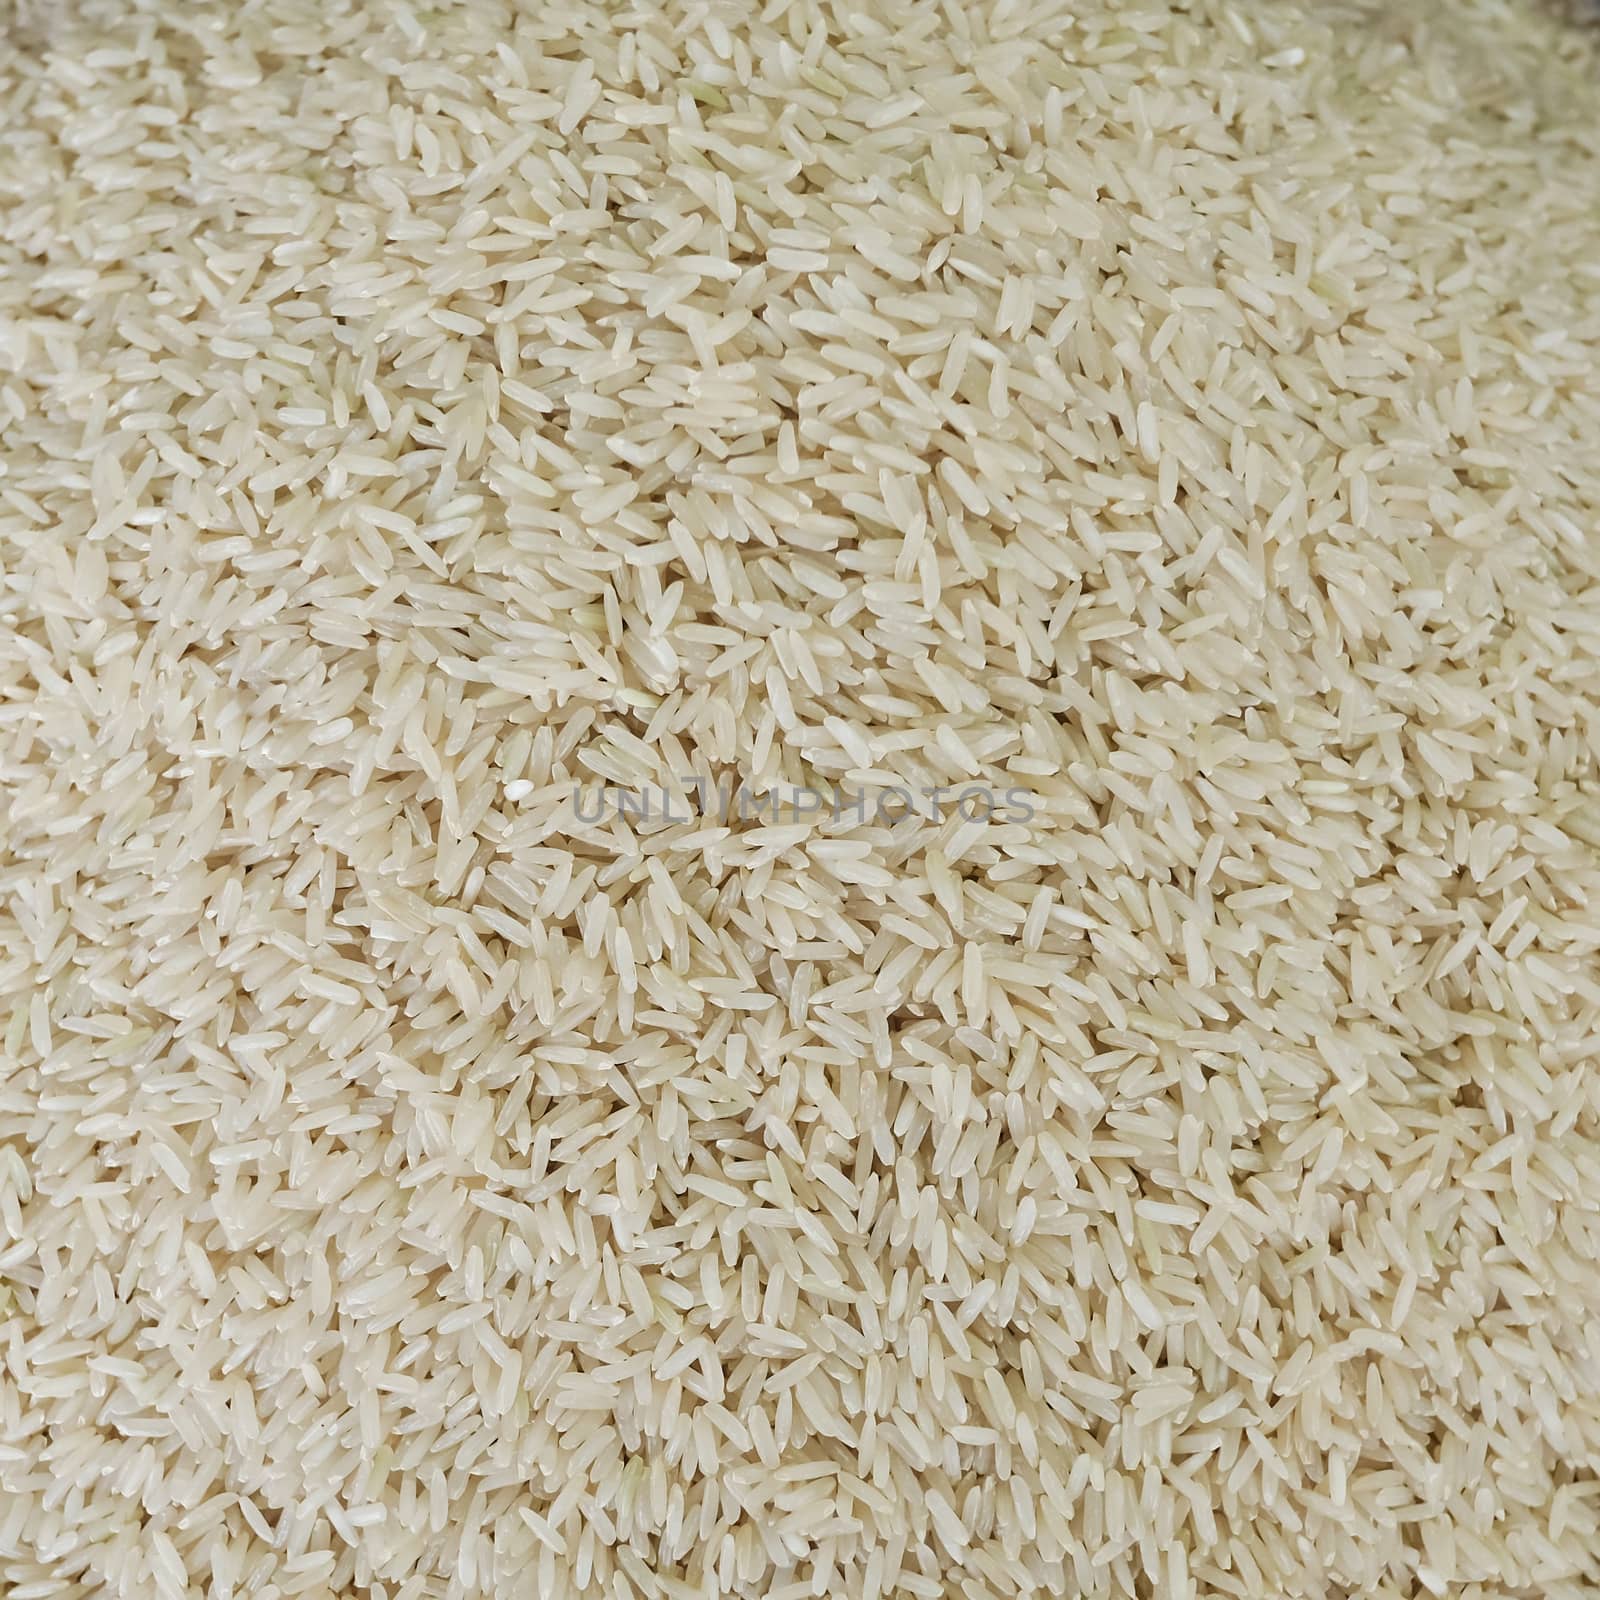 Uncooked white rice background